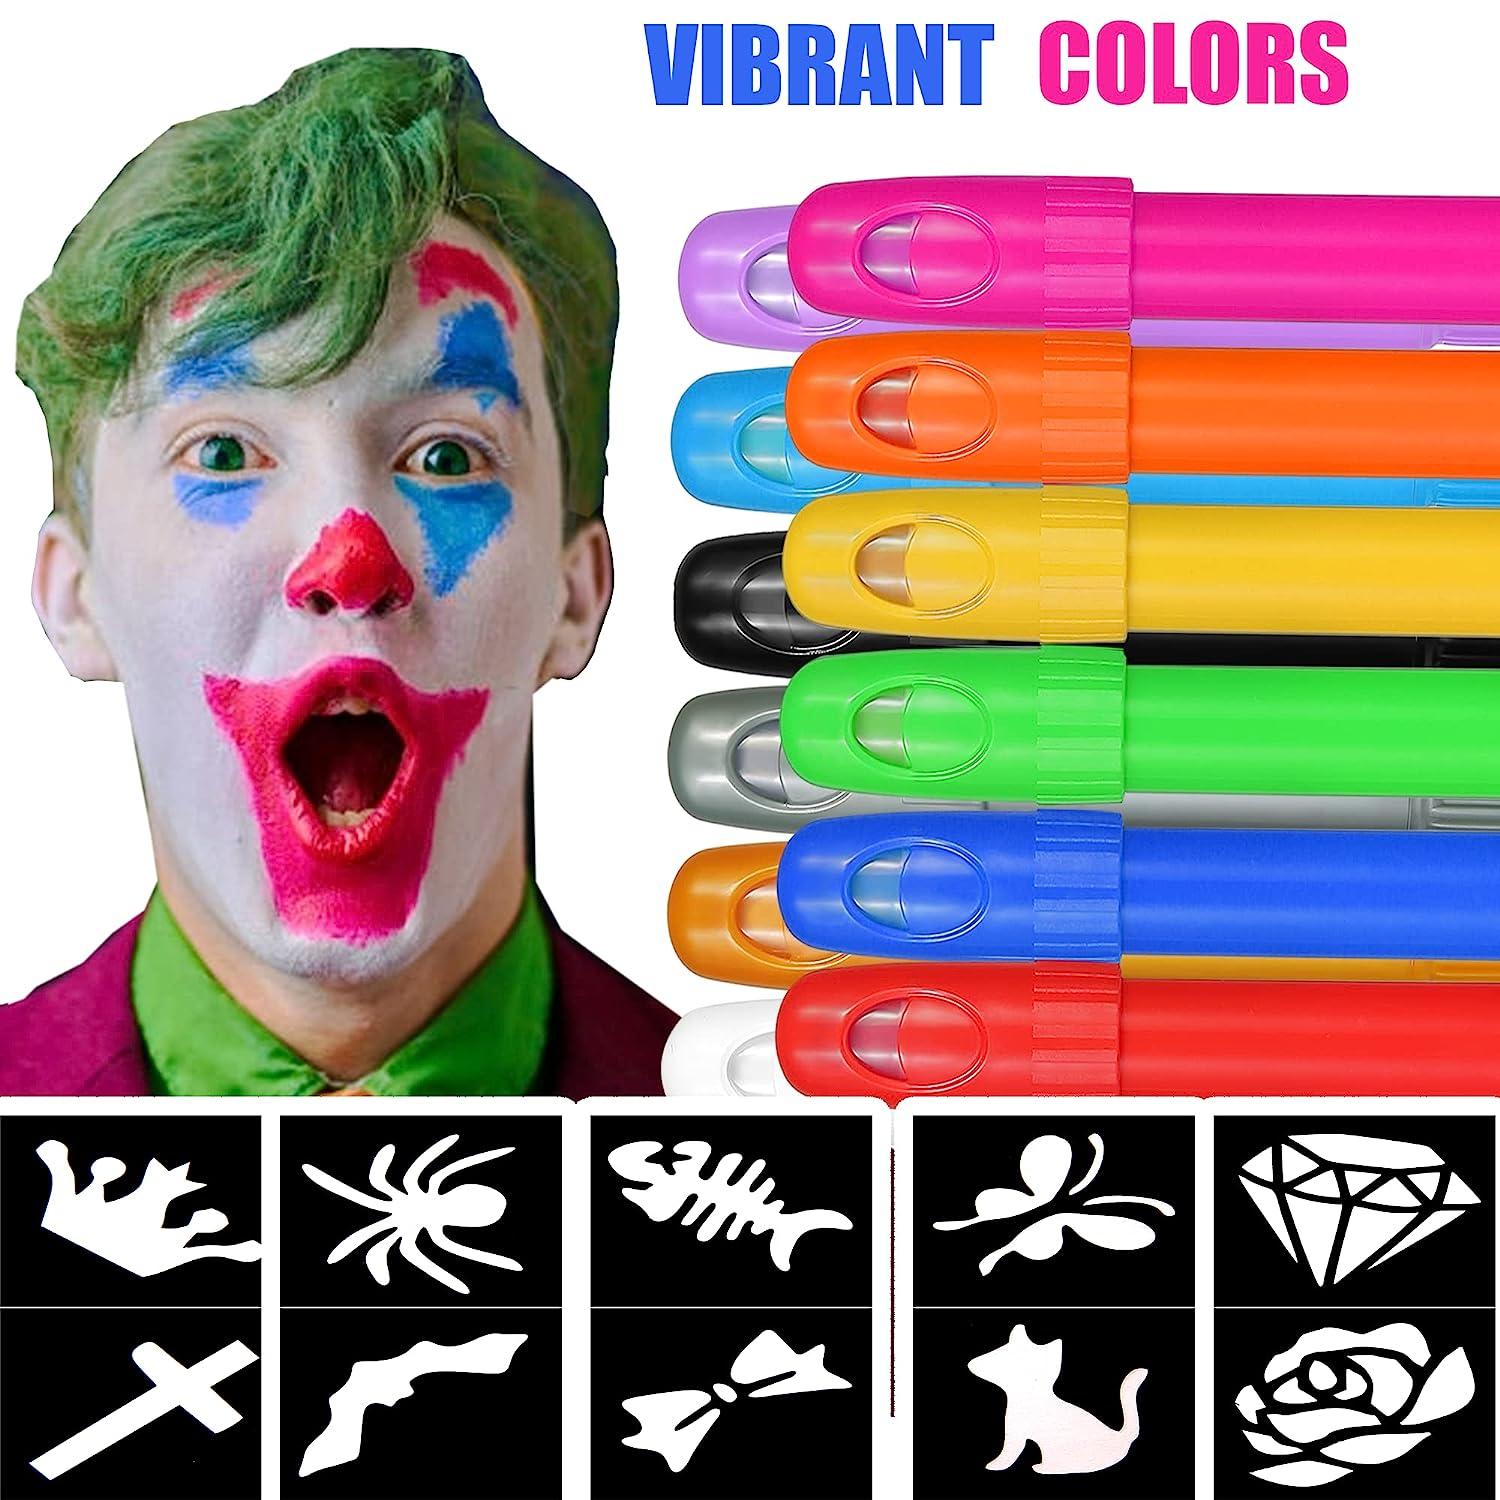  Jim&Gloria Face Painting Kit for Kids 32 Colors Metallic, Neon,  Classic + Makeup Brush, Skin Safe, Washable and Professional Body Paint  Sticks Set, Cosplay Costume Christmas Gift for Kids, Teen, Adult 